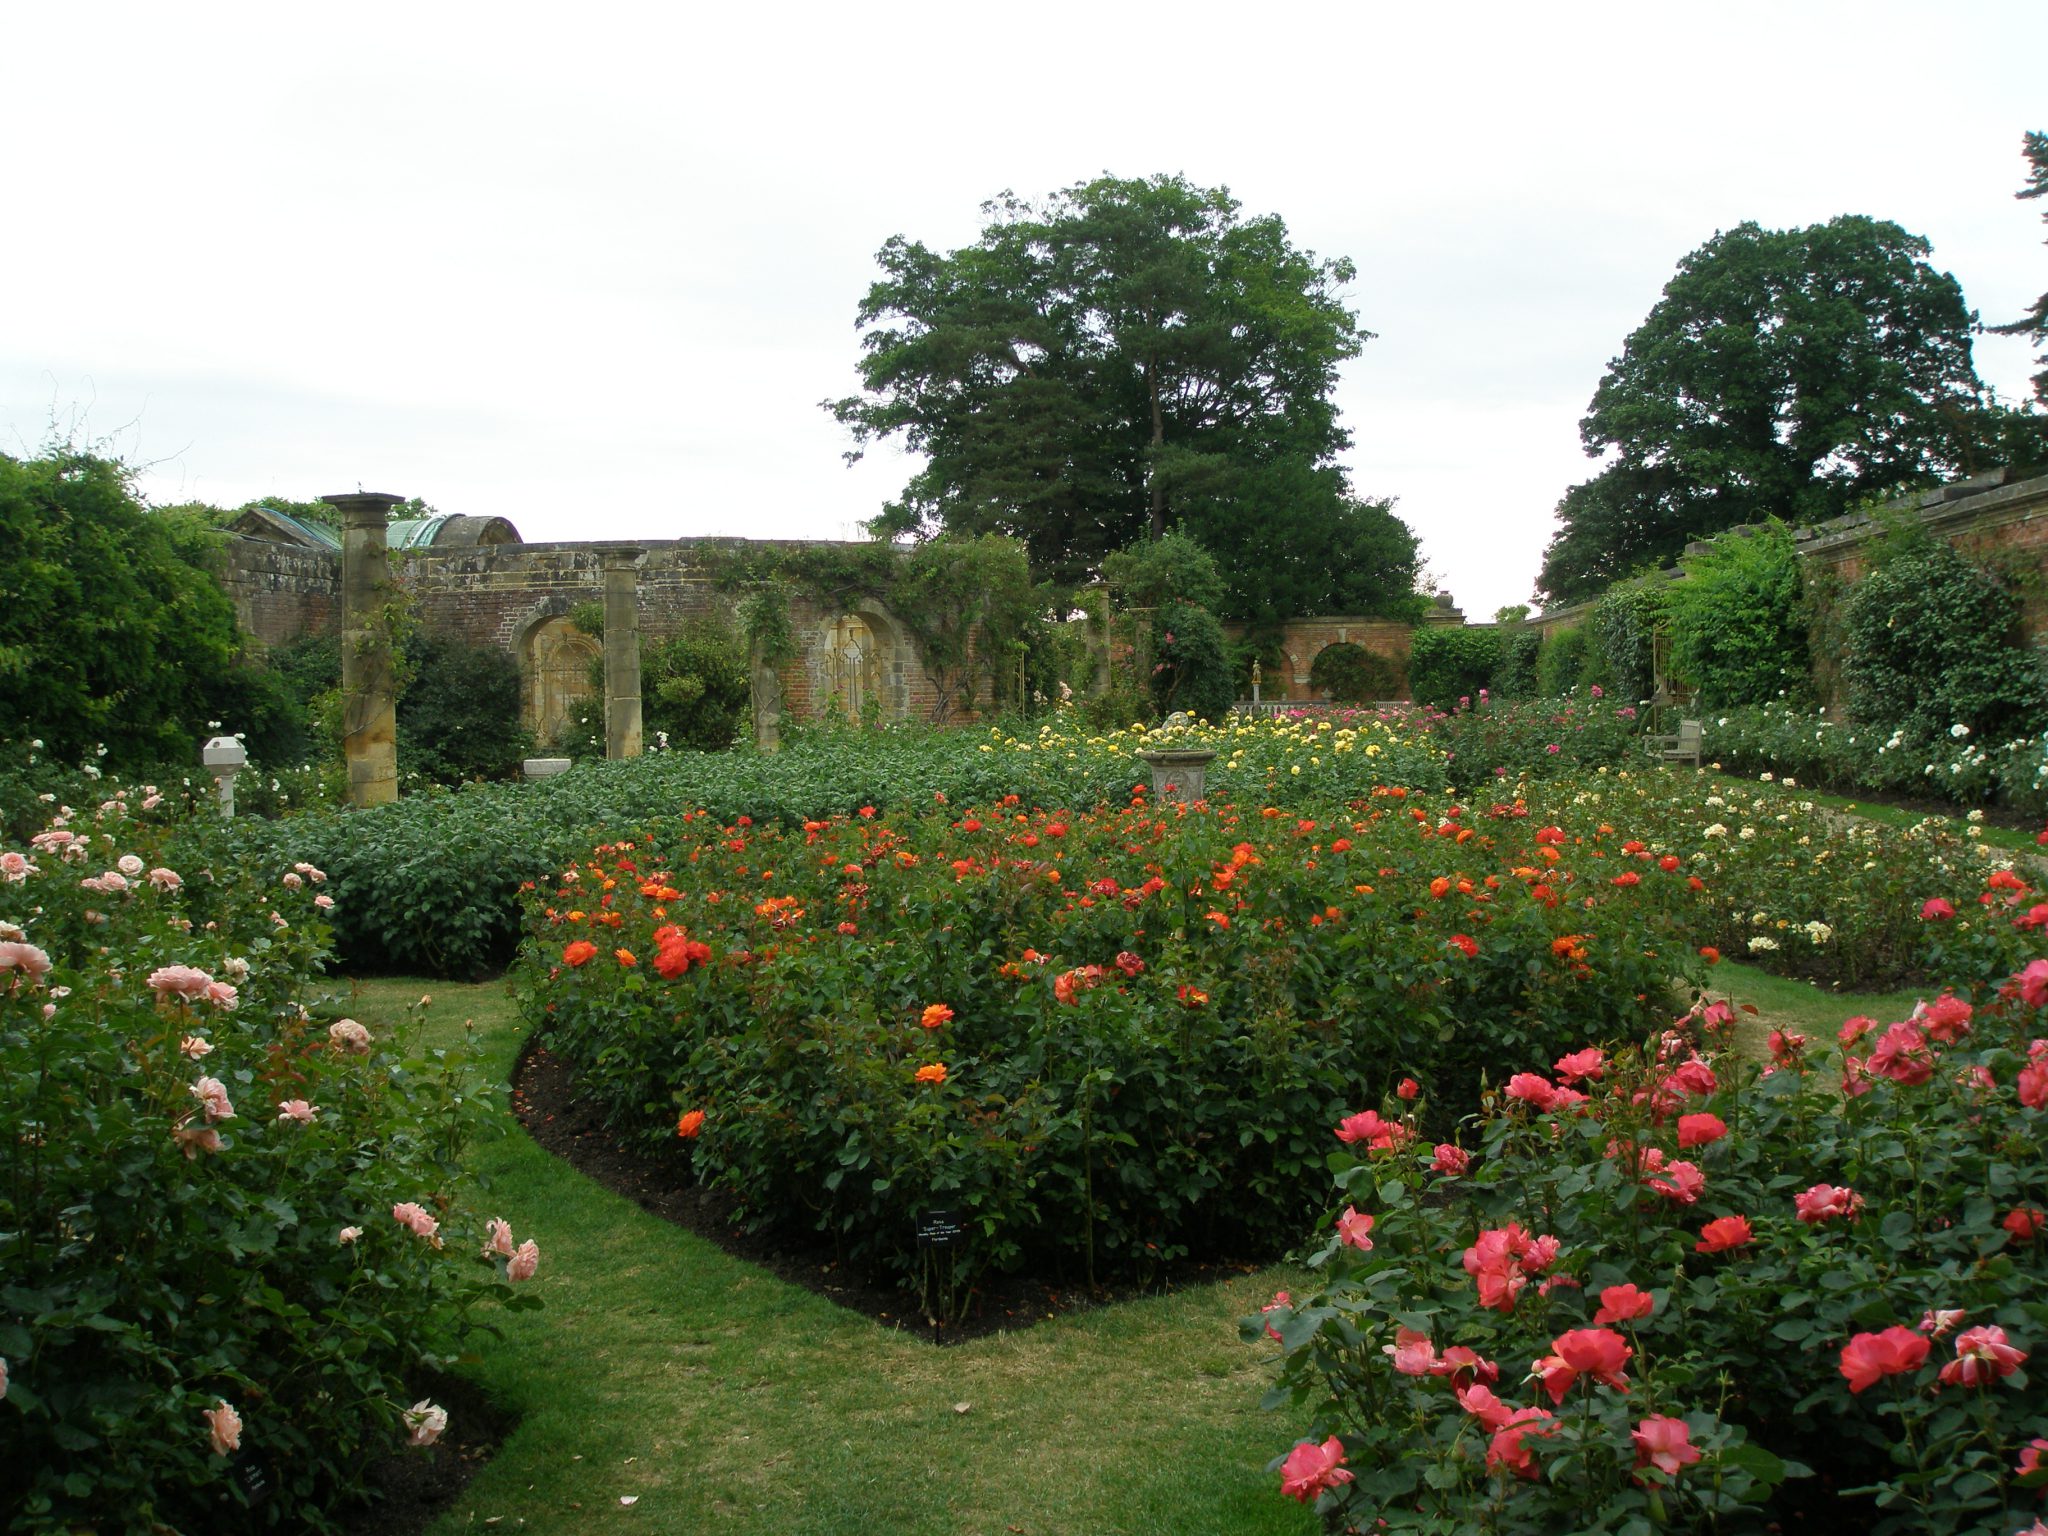 Astor's extensive Rose Gardens are on the southeastern side of the Italian Garden